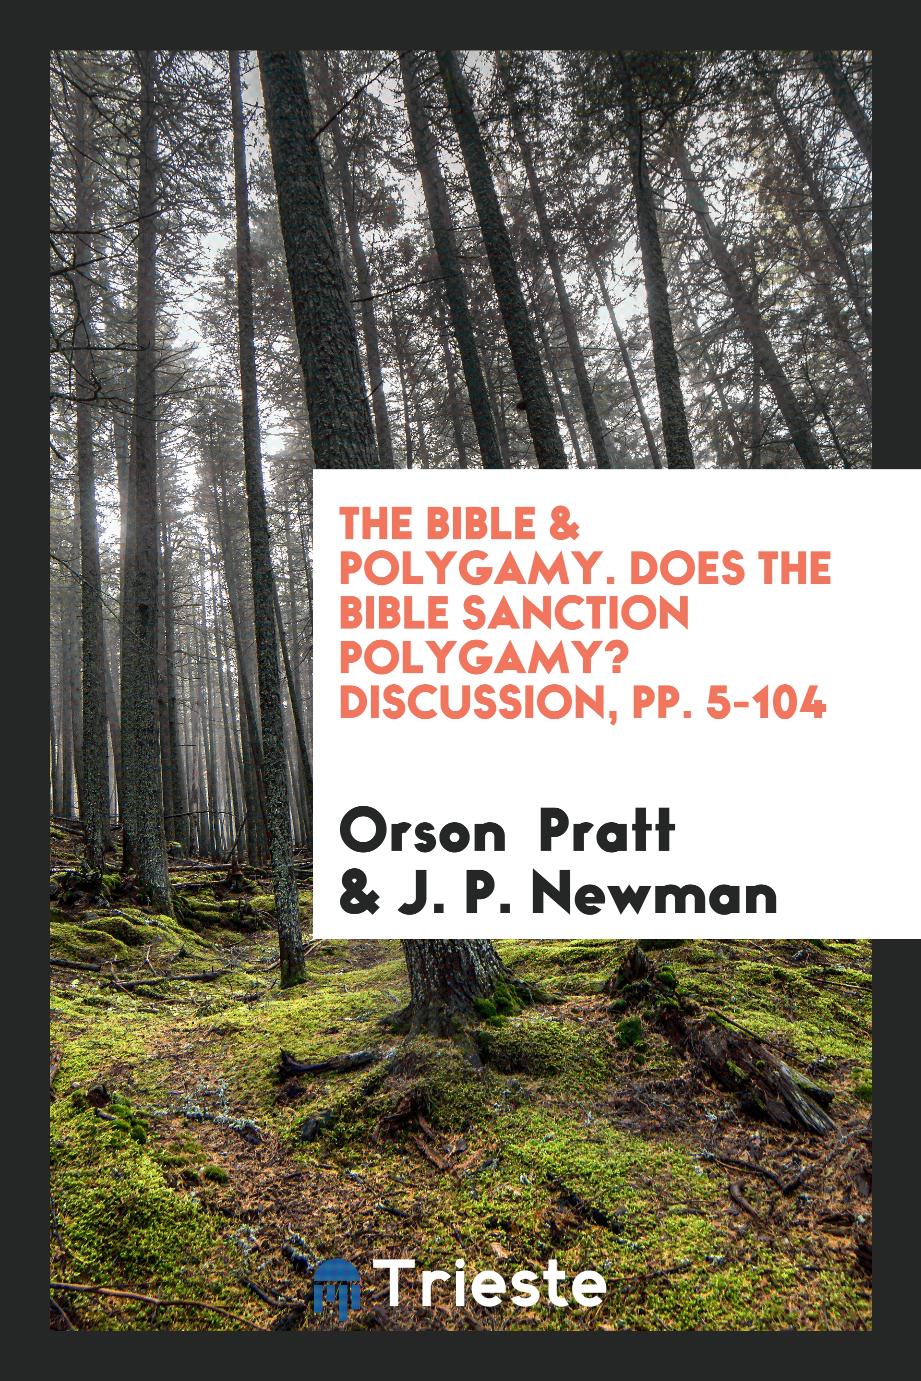 The Bible & Polygamy. Does the Bible Sanction Polygamy? Discussion, pp. 5-104